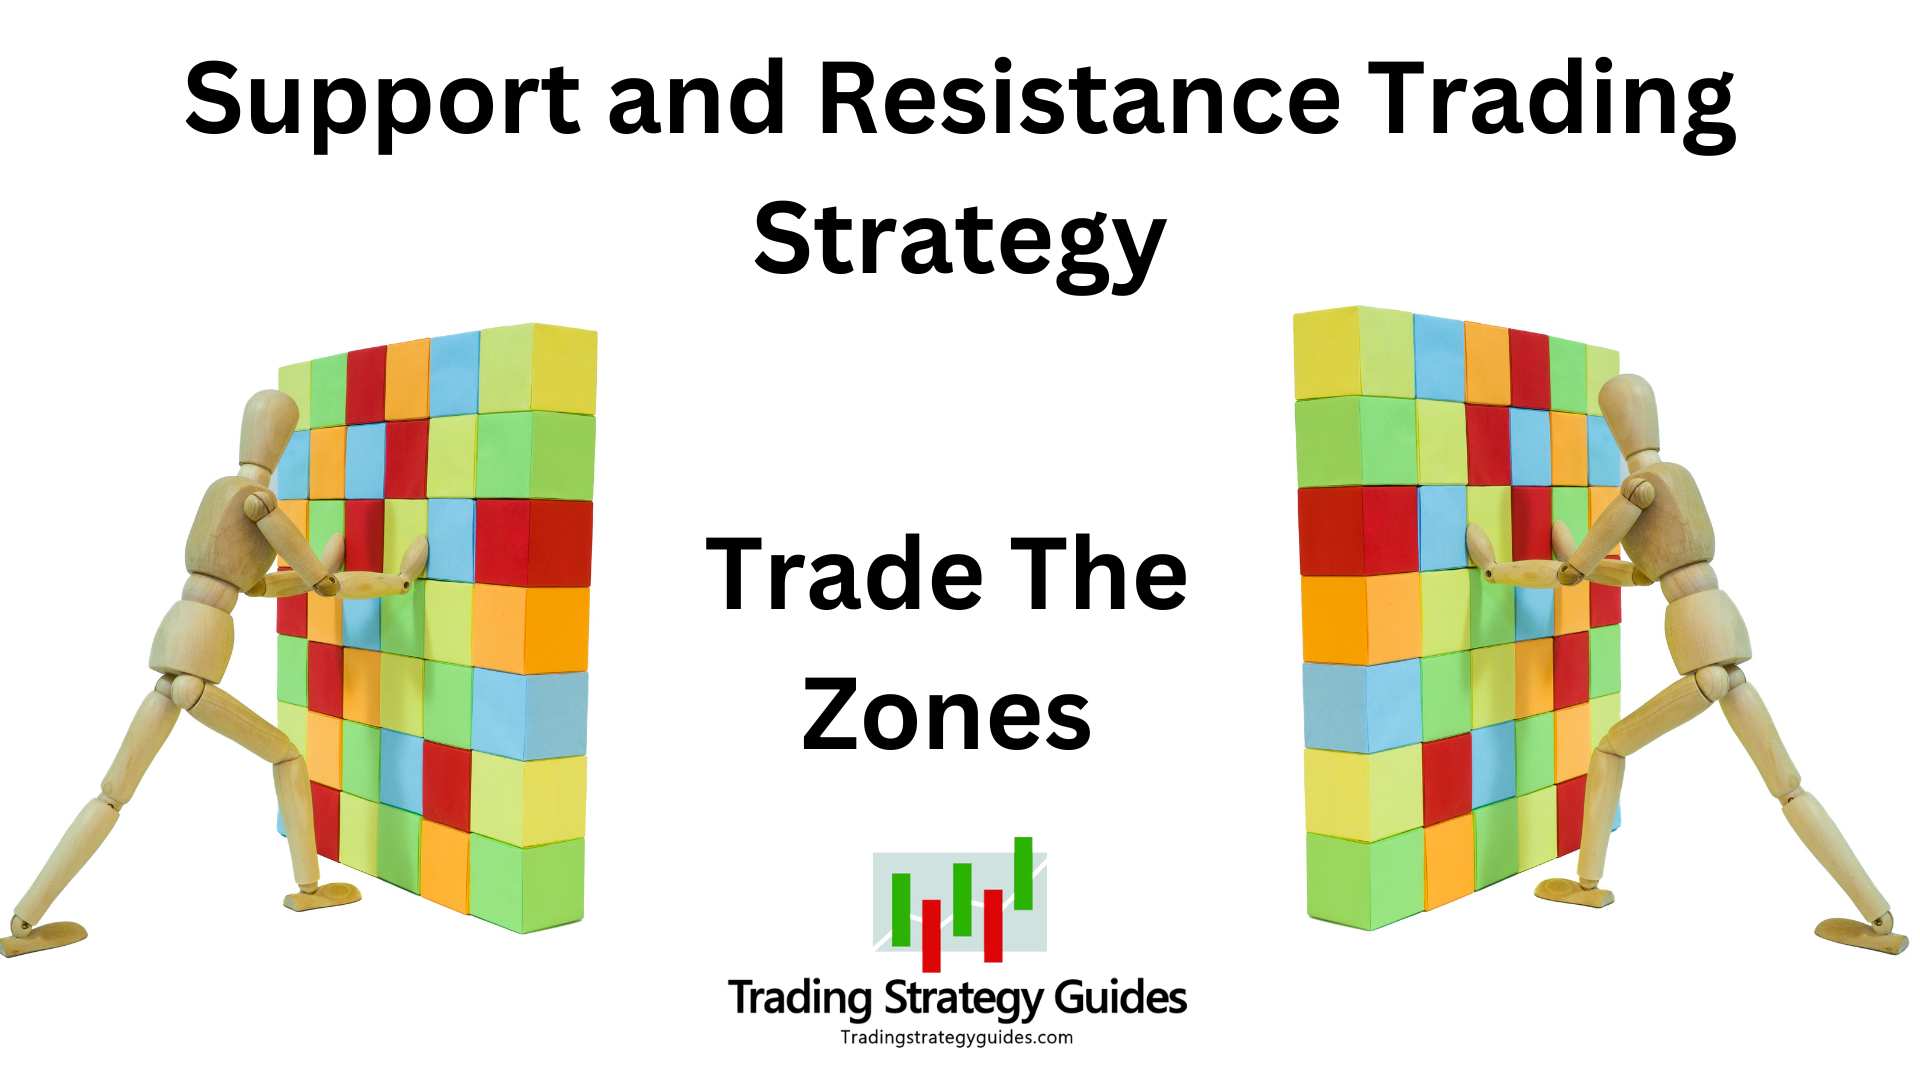 Support and Resistance - The Complete Guide for Traders